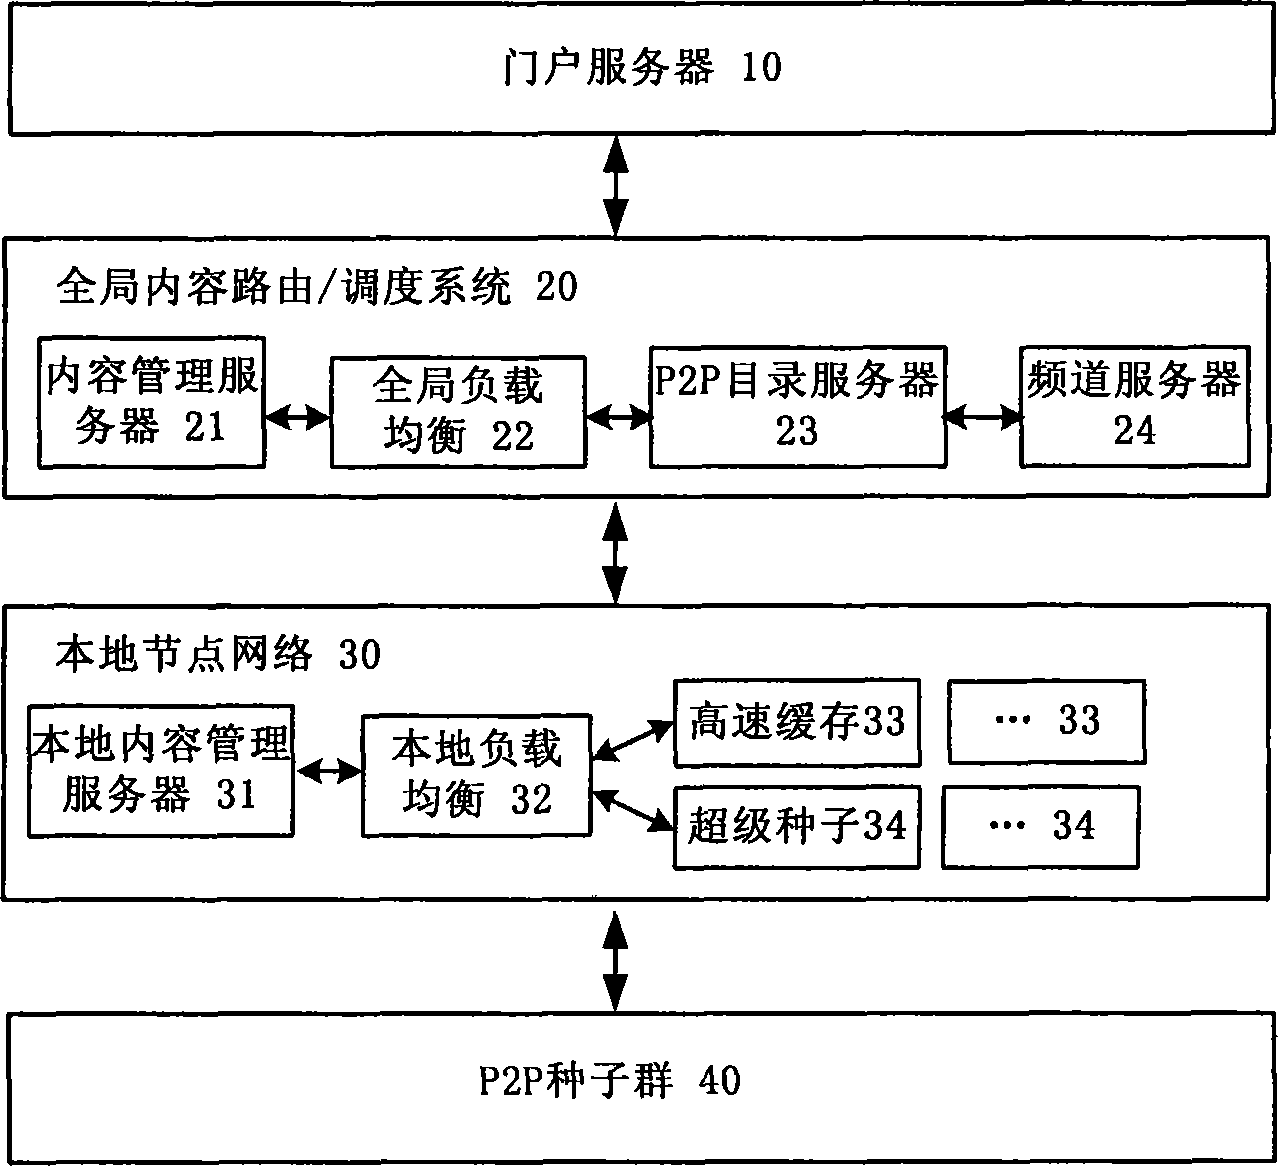 Content providing method and system based on content distribution network and peer-to-peer network